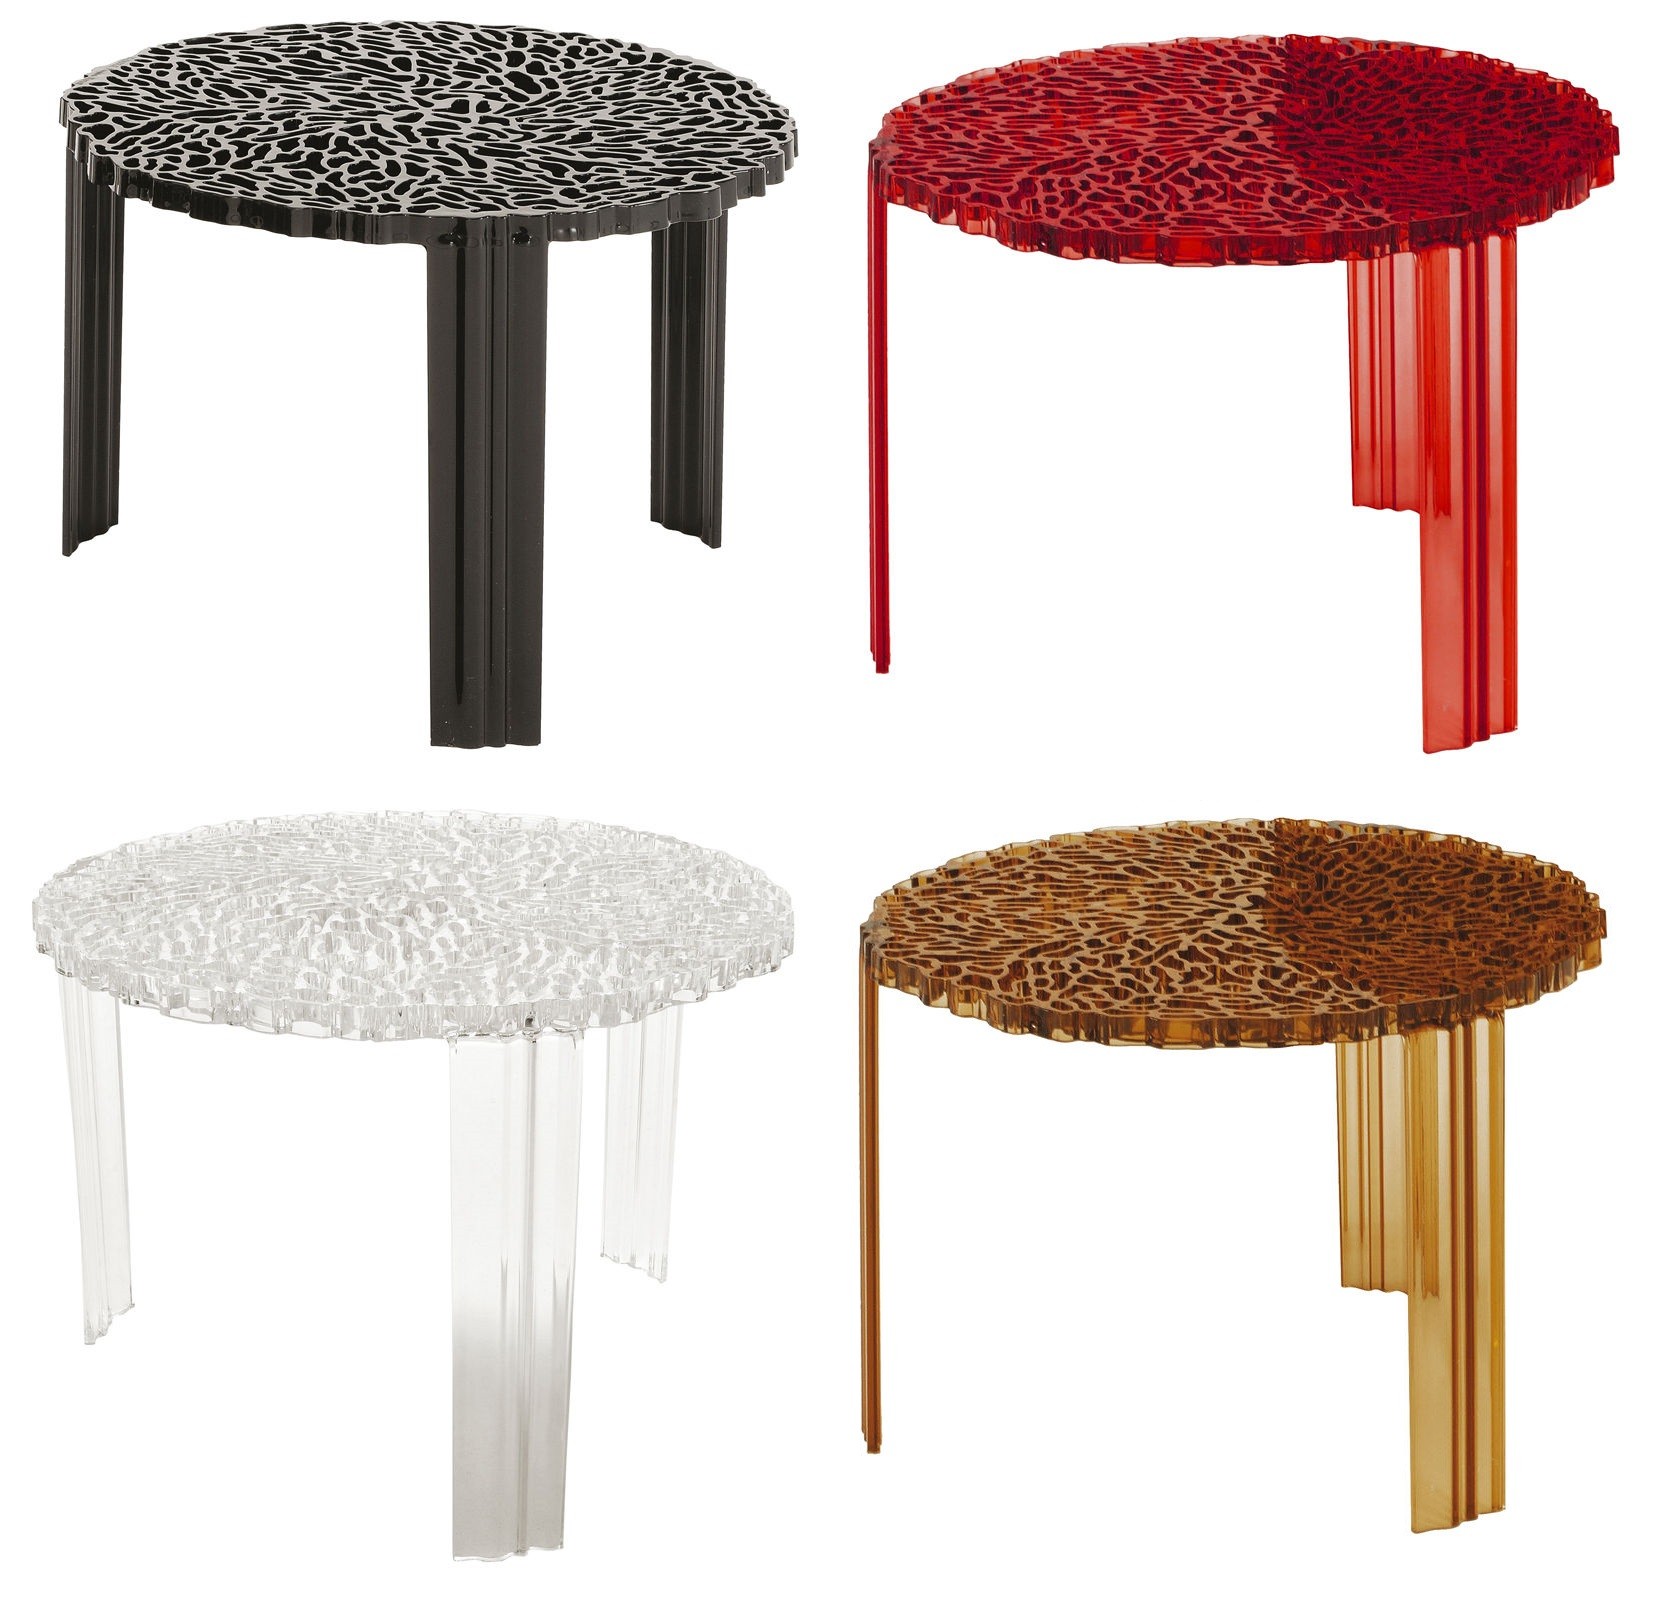 T-Table basso Kartell - Luci e Forme